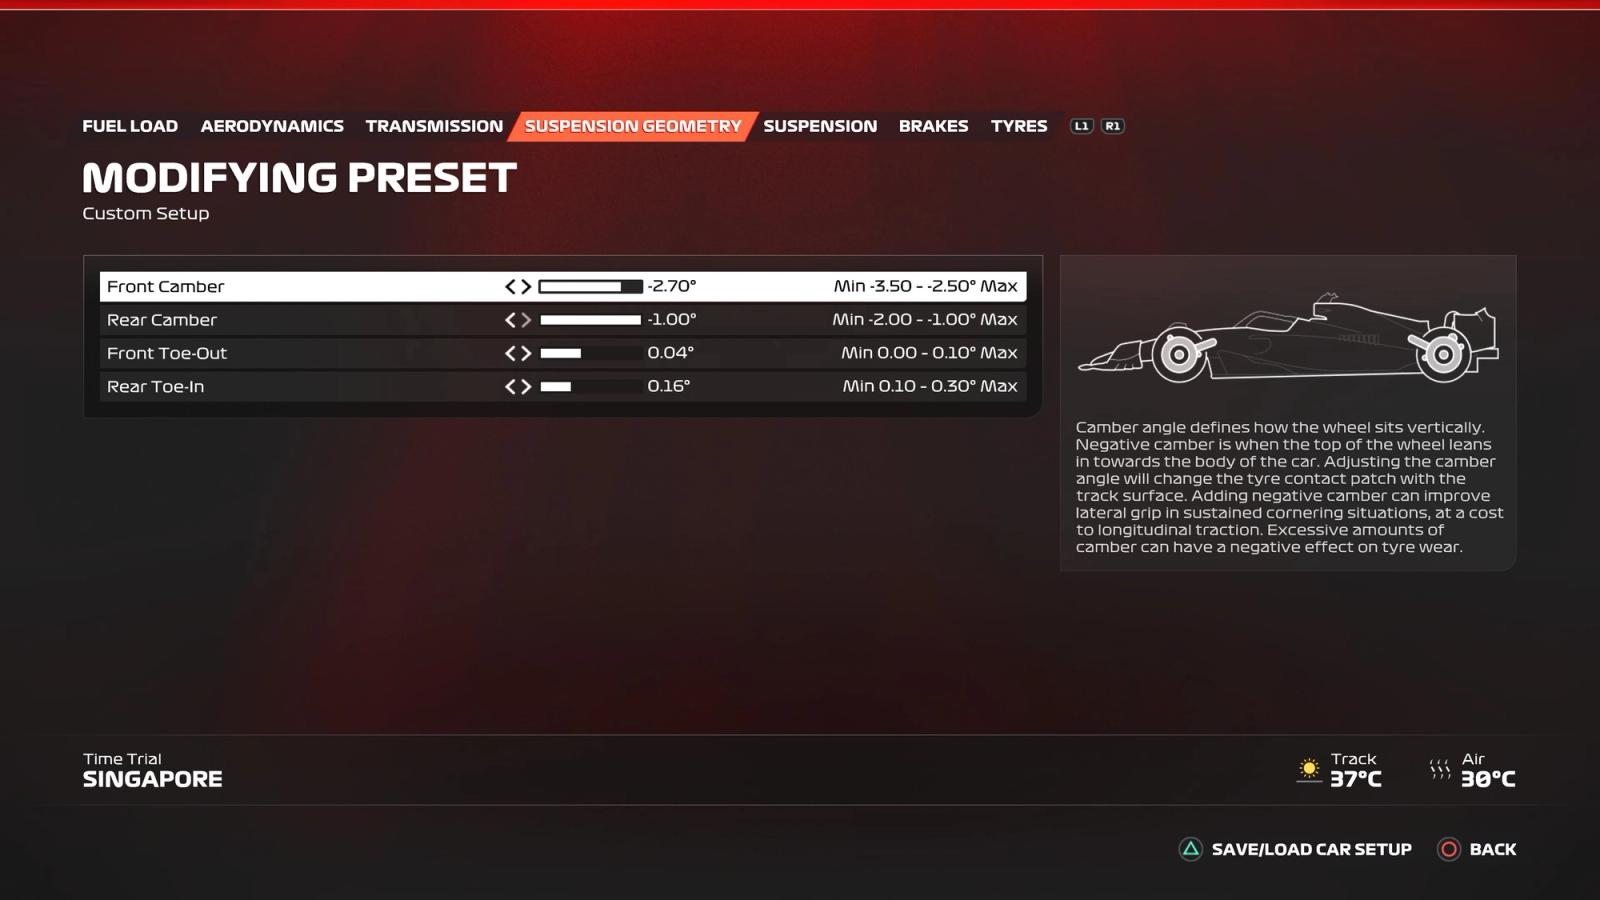 F1 23 Singapore setup suspension geometry screen showing the ideal settings